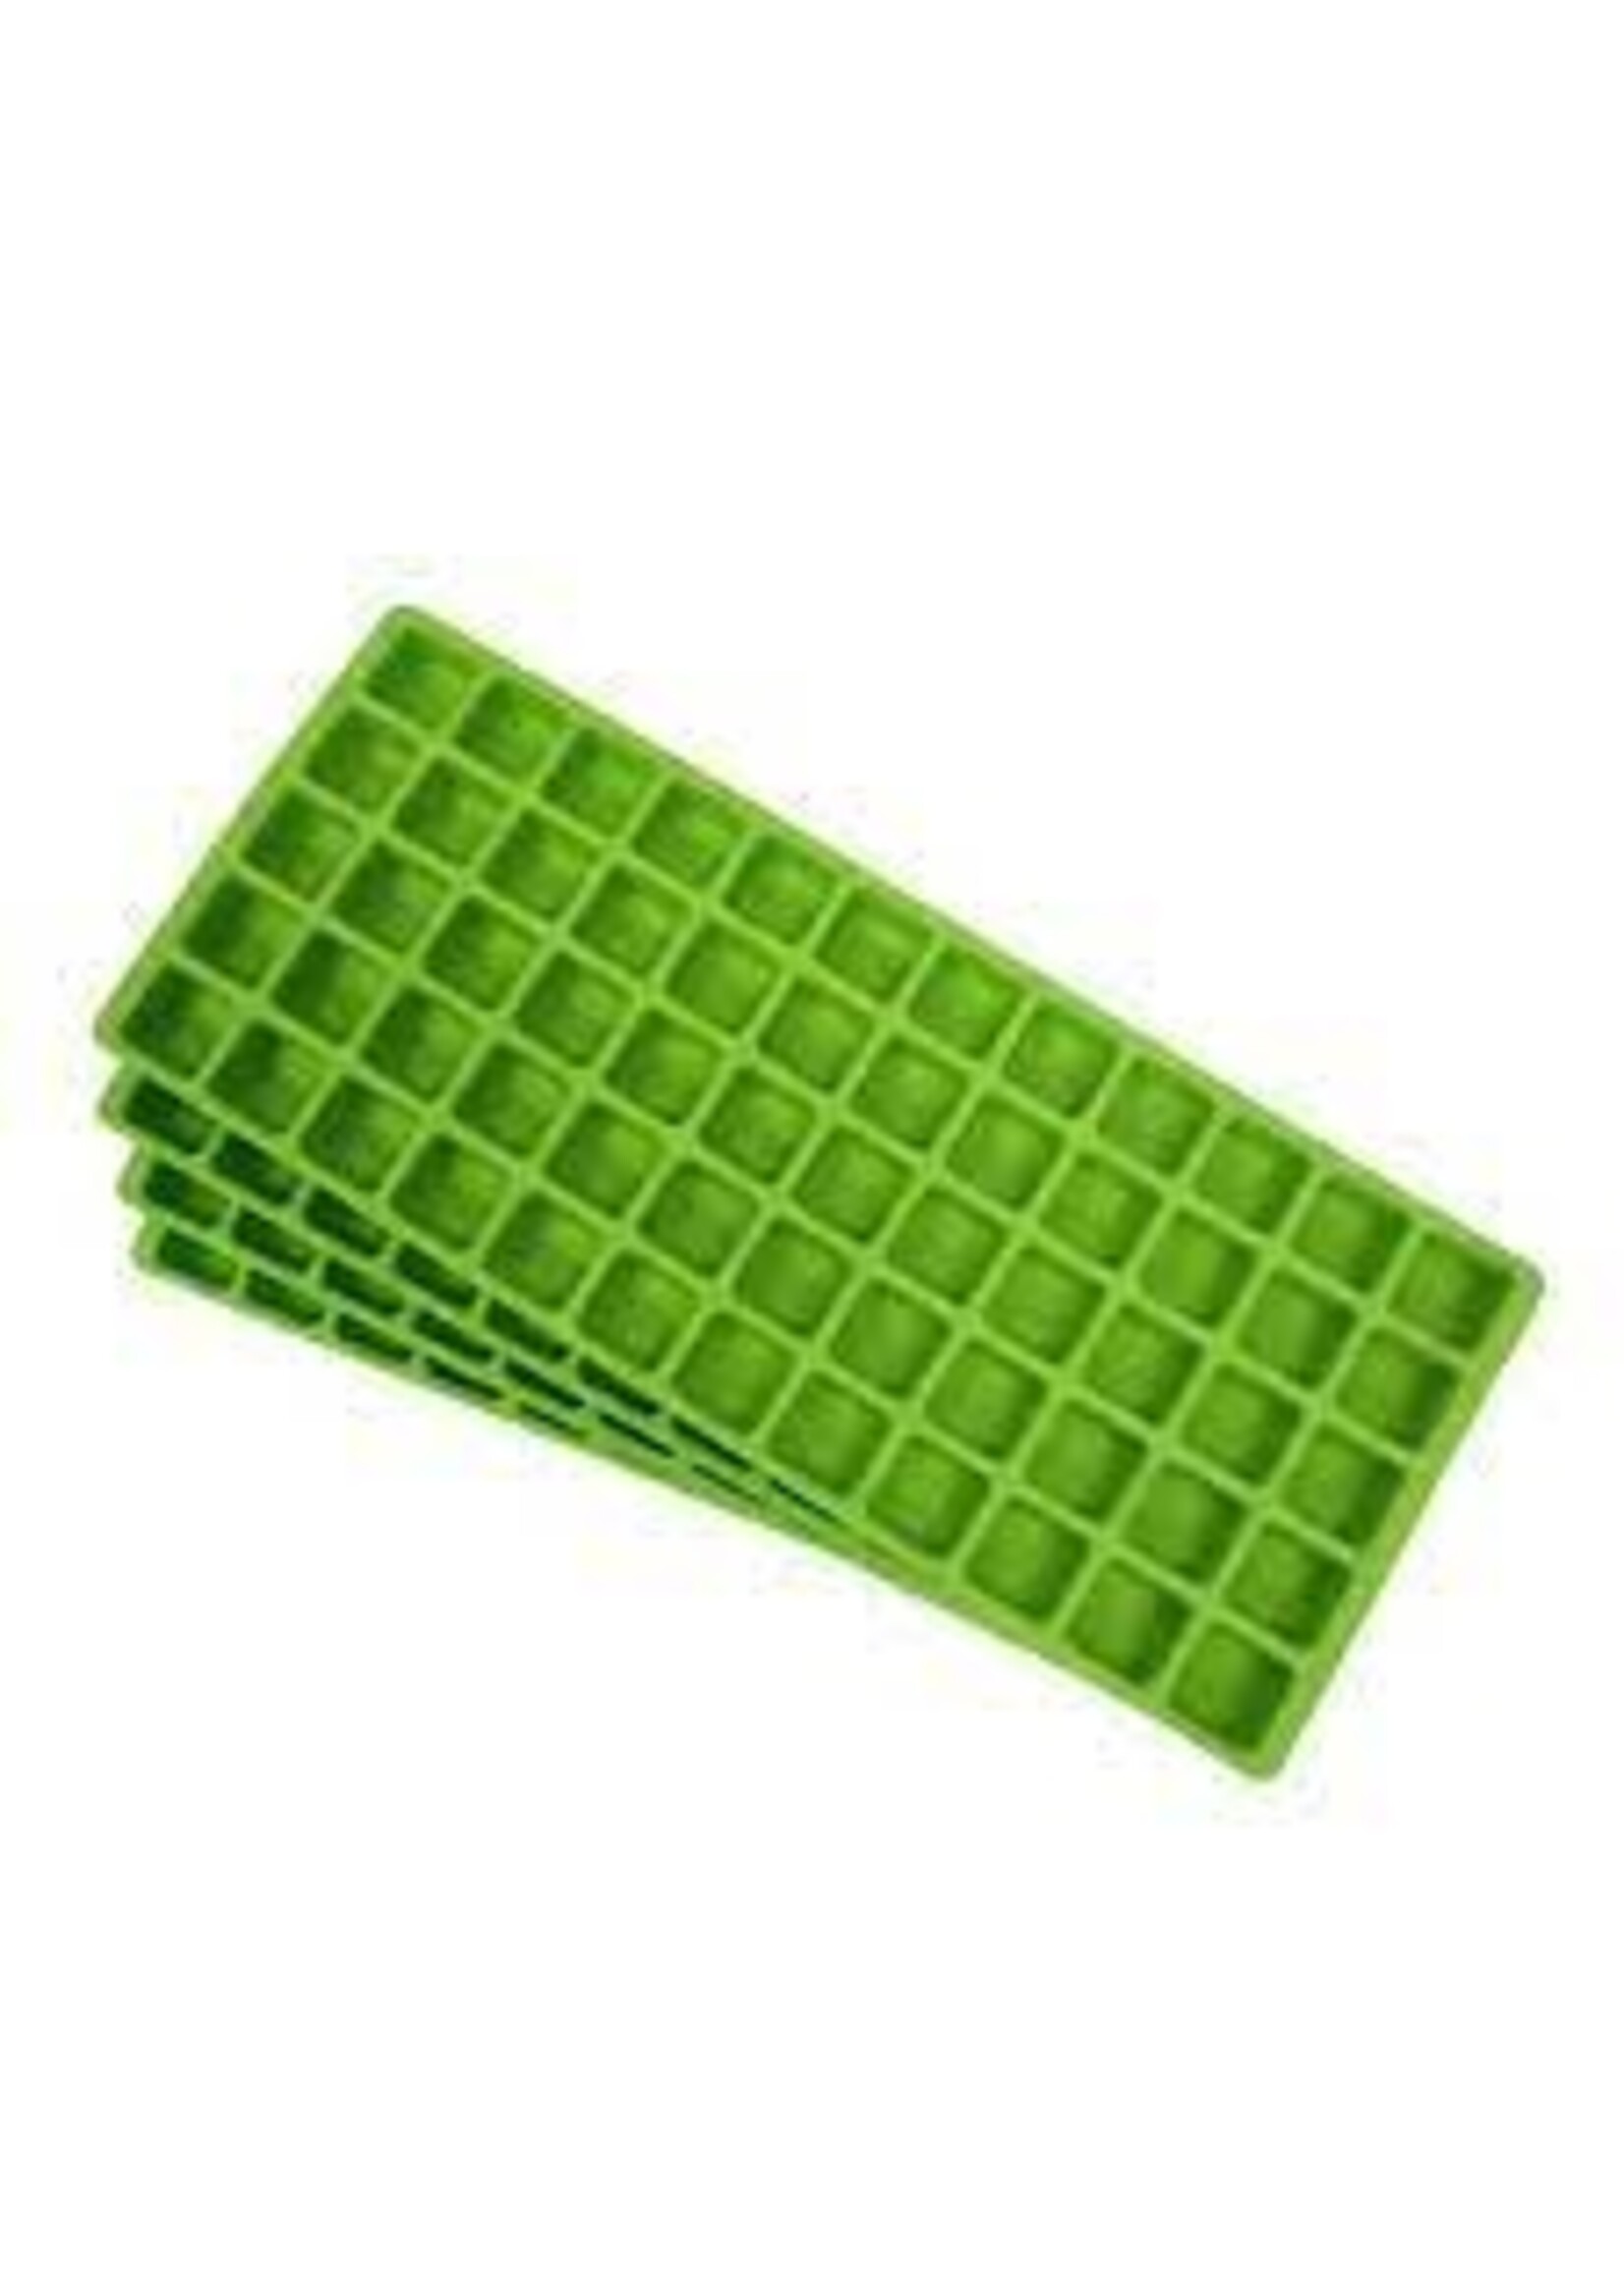 Harvest Right Harvest Right Silicone Food Molds M (Set of 4)